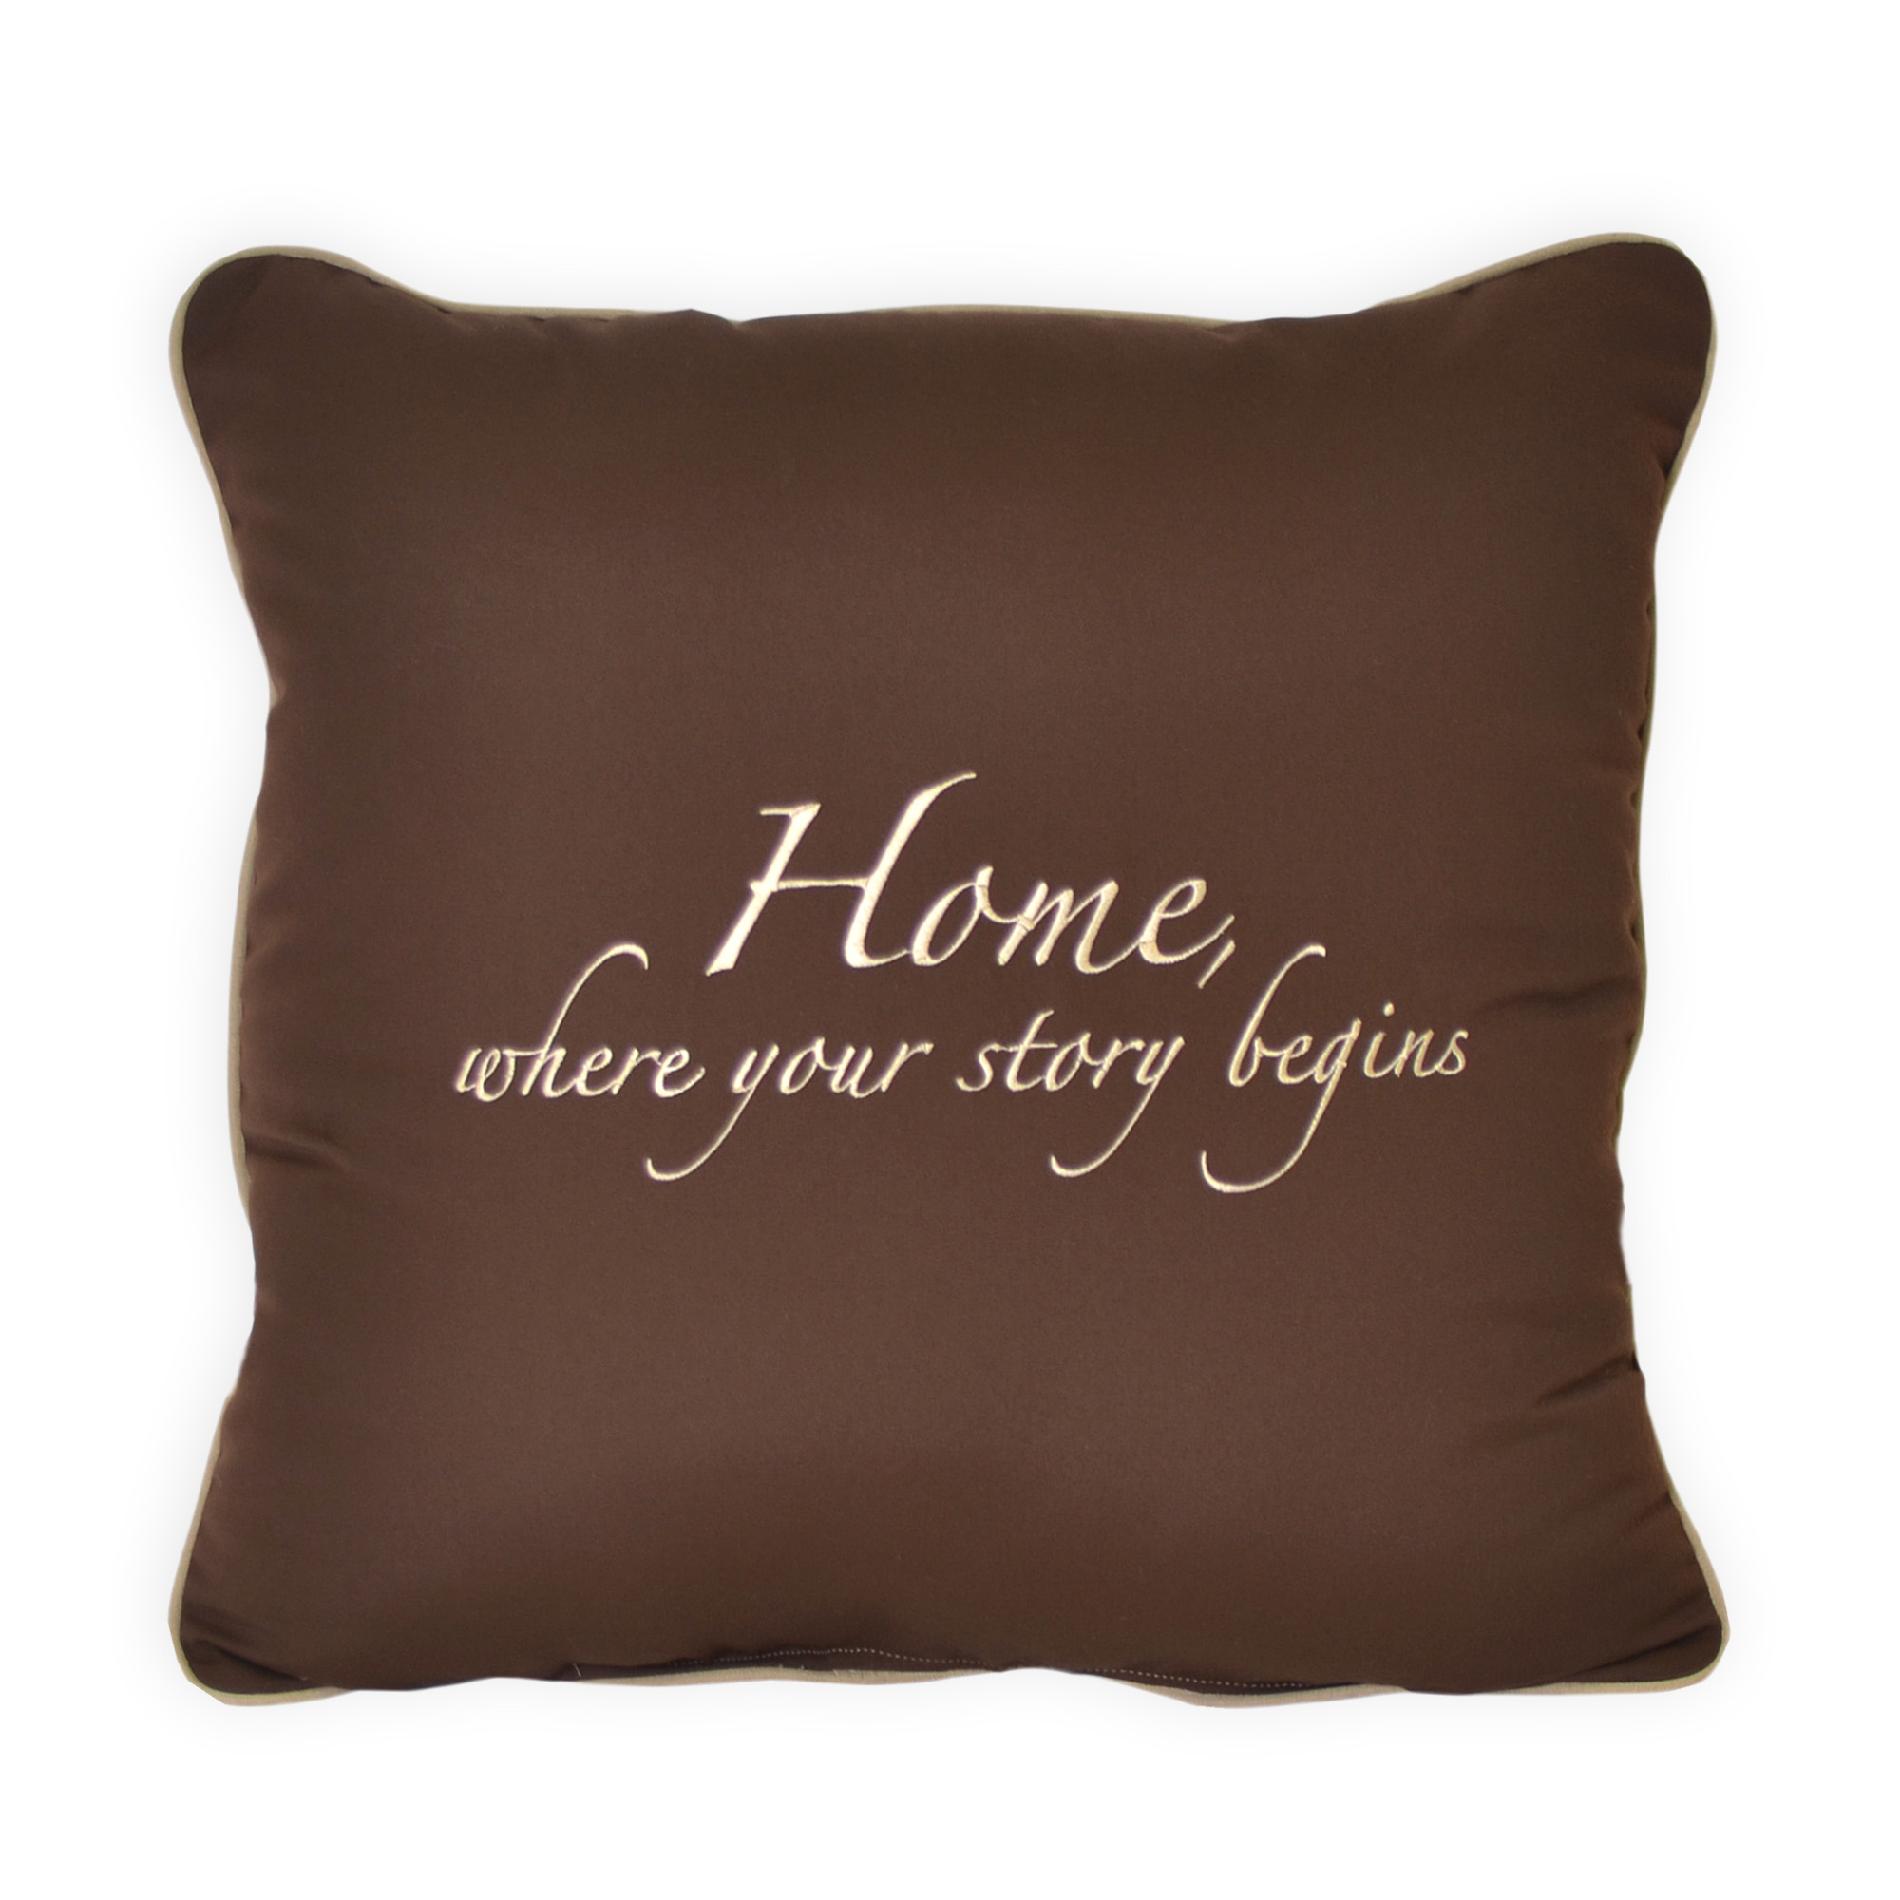 Deluxe (24") Embroidered Billboard Pillow - "Home, where your story begins" - Color:  Canvas Bay Brown